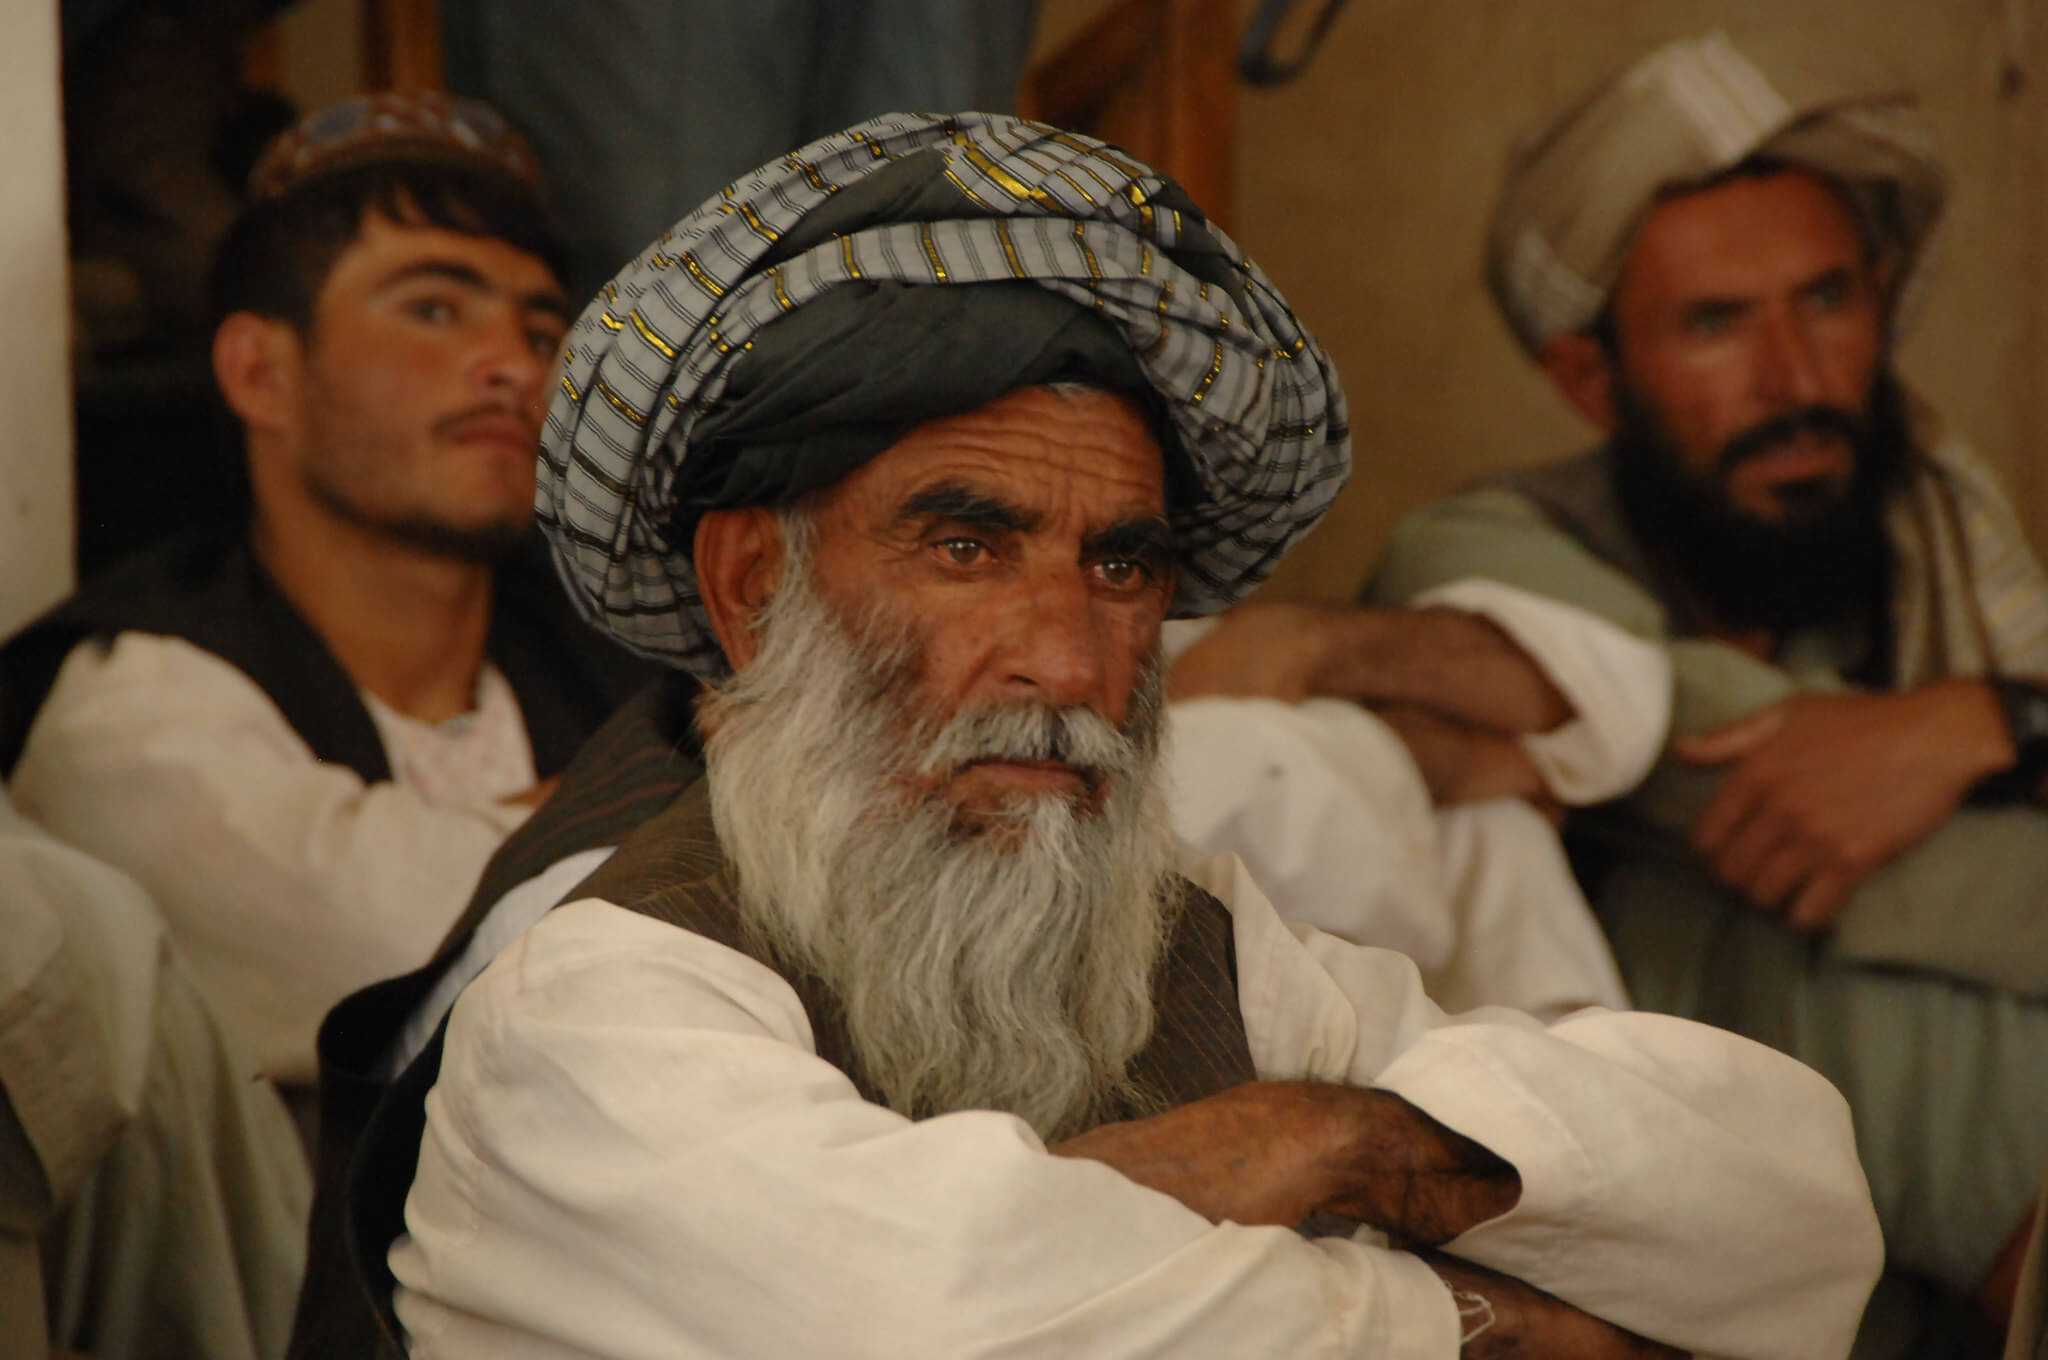 Malejacq -  Afghan district leaders and village elders discuss issues facing the Khakrez district in 2010. DVIDSHUB - Flickr